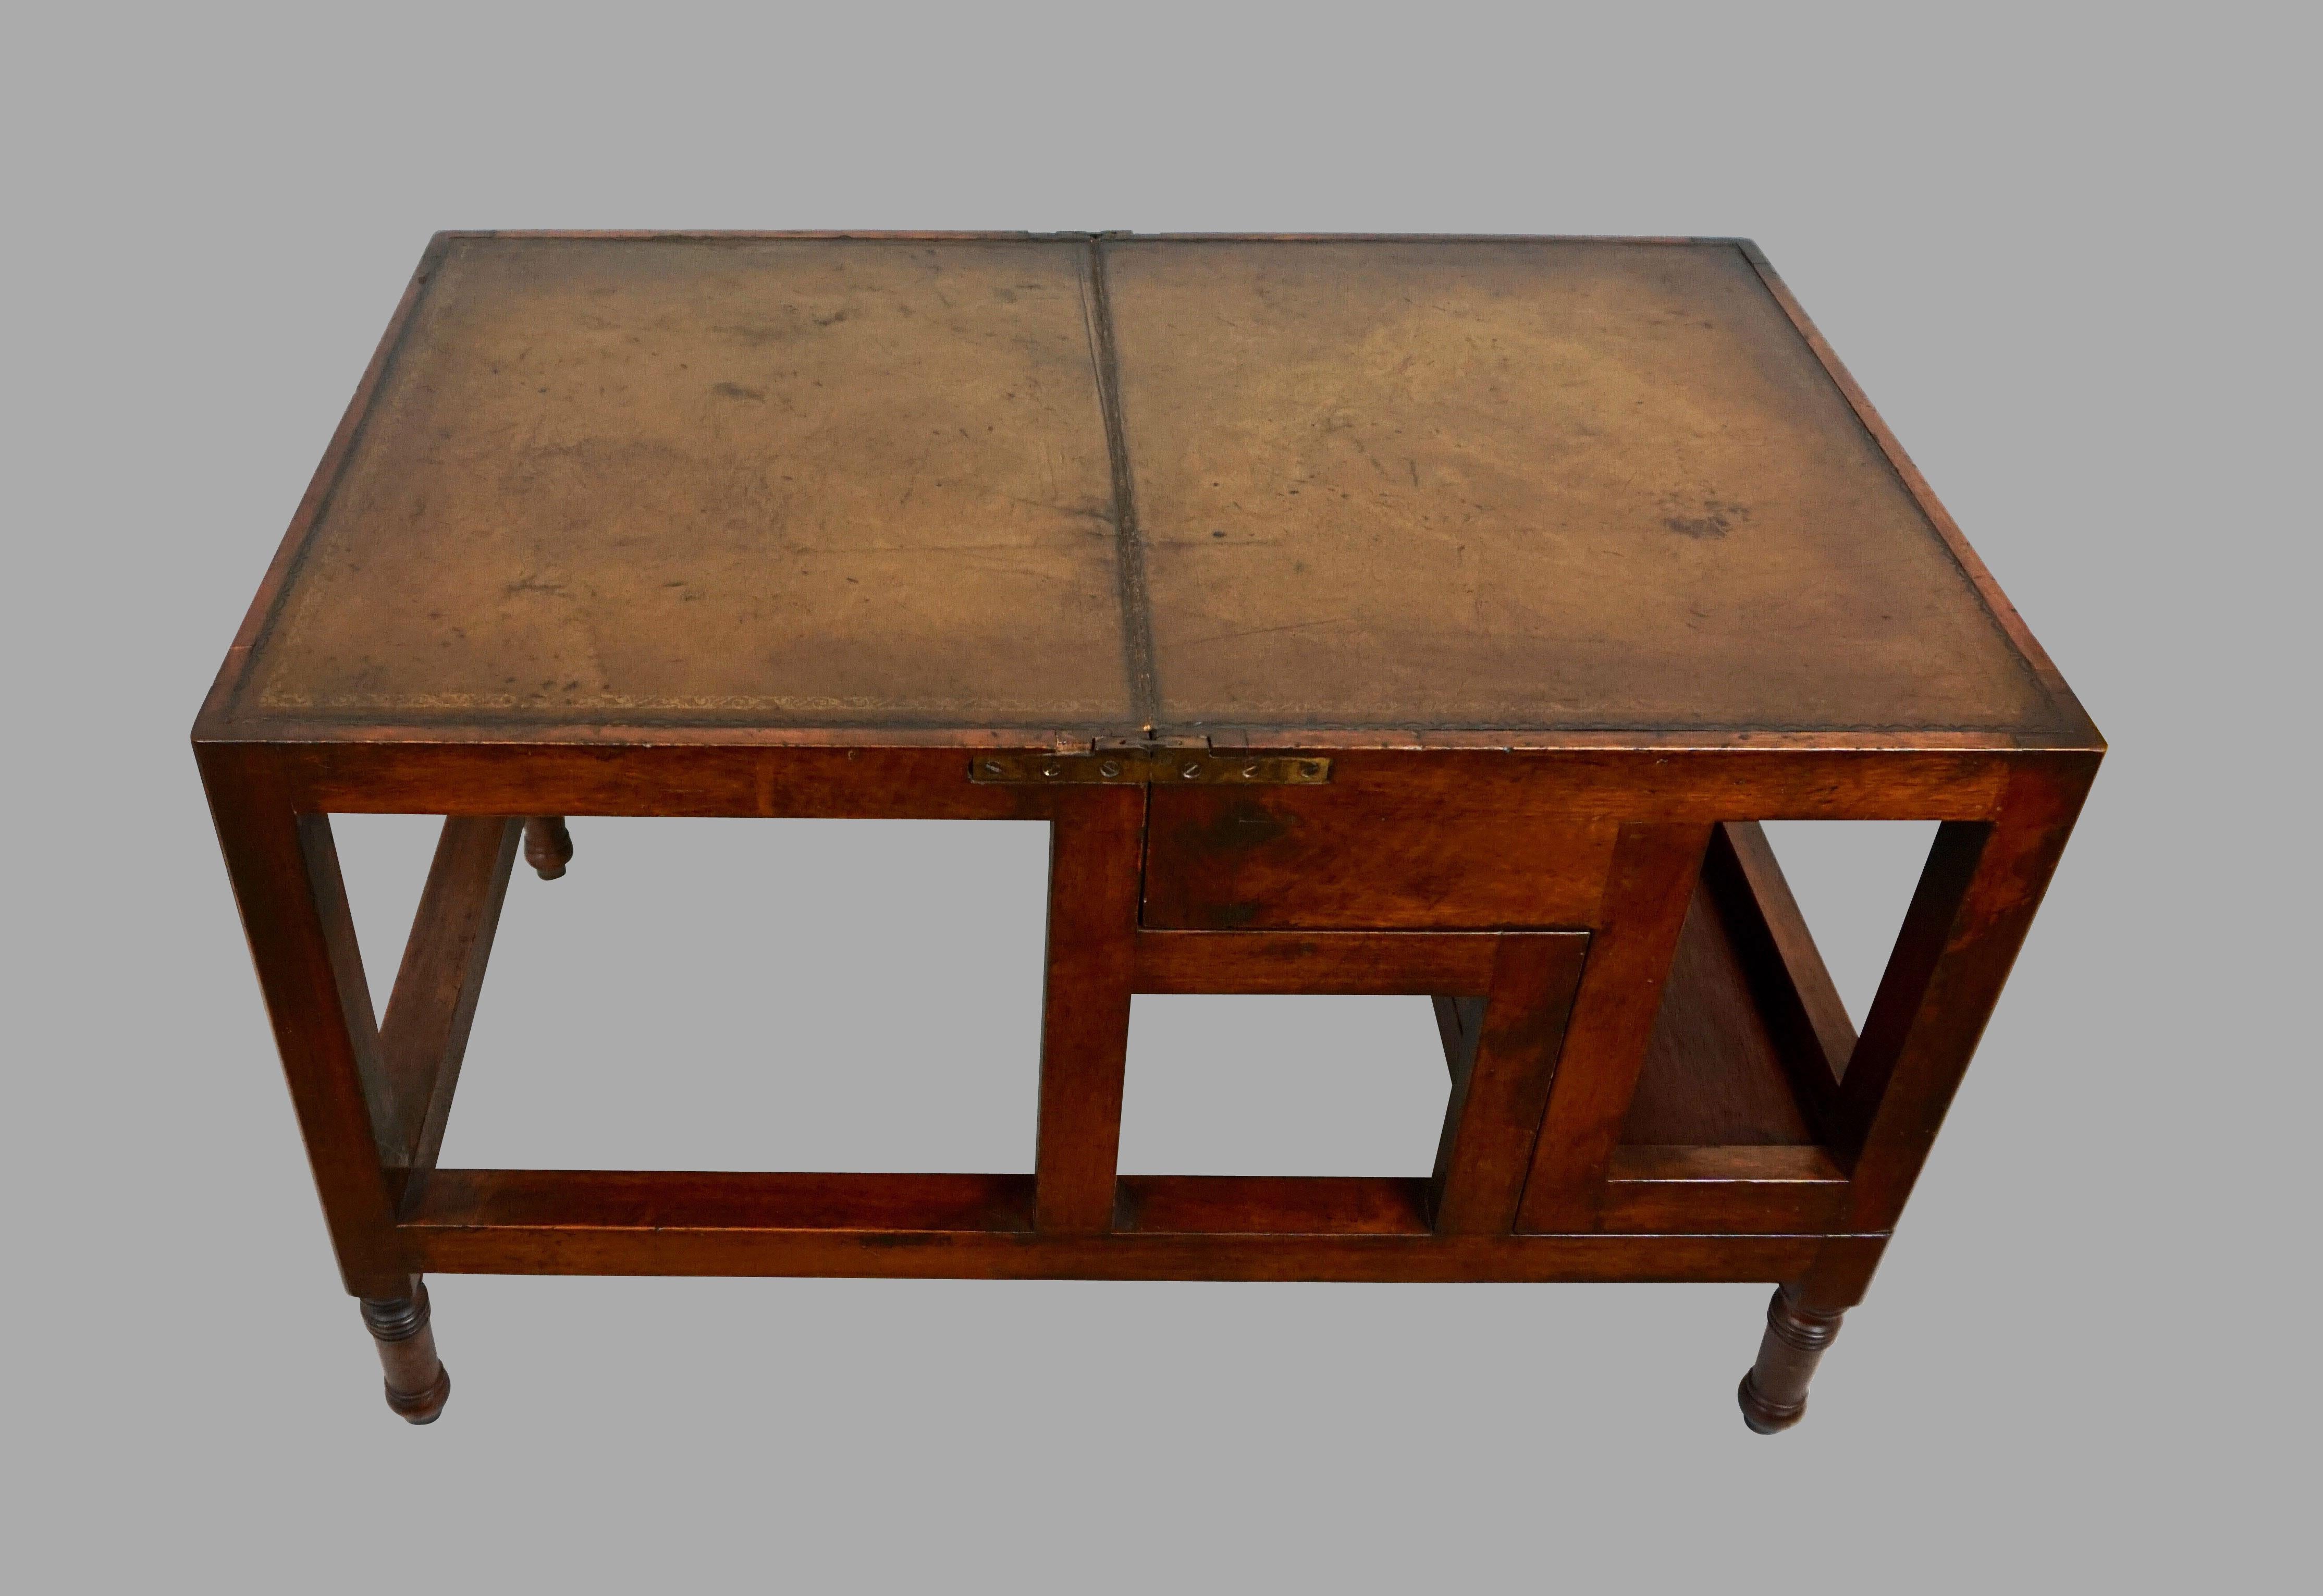 An English mahogany Regency style metamorphic library table with a brown tooled leather top which when opened becomes a library stairs with 4 tooled leather steps. This type of metamorphic furniture is very practical and decorative at the same time.